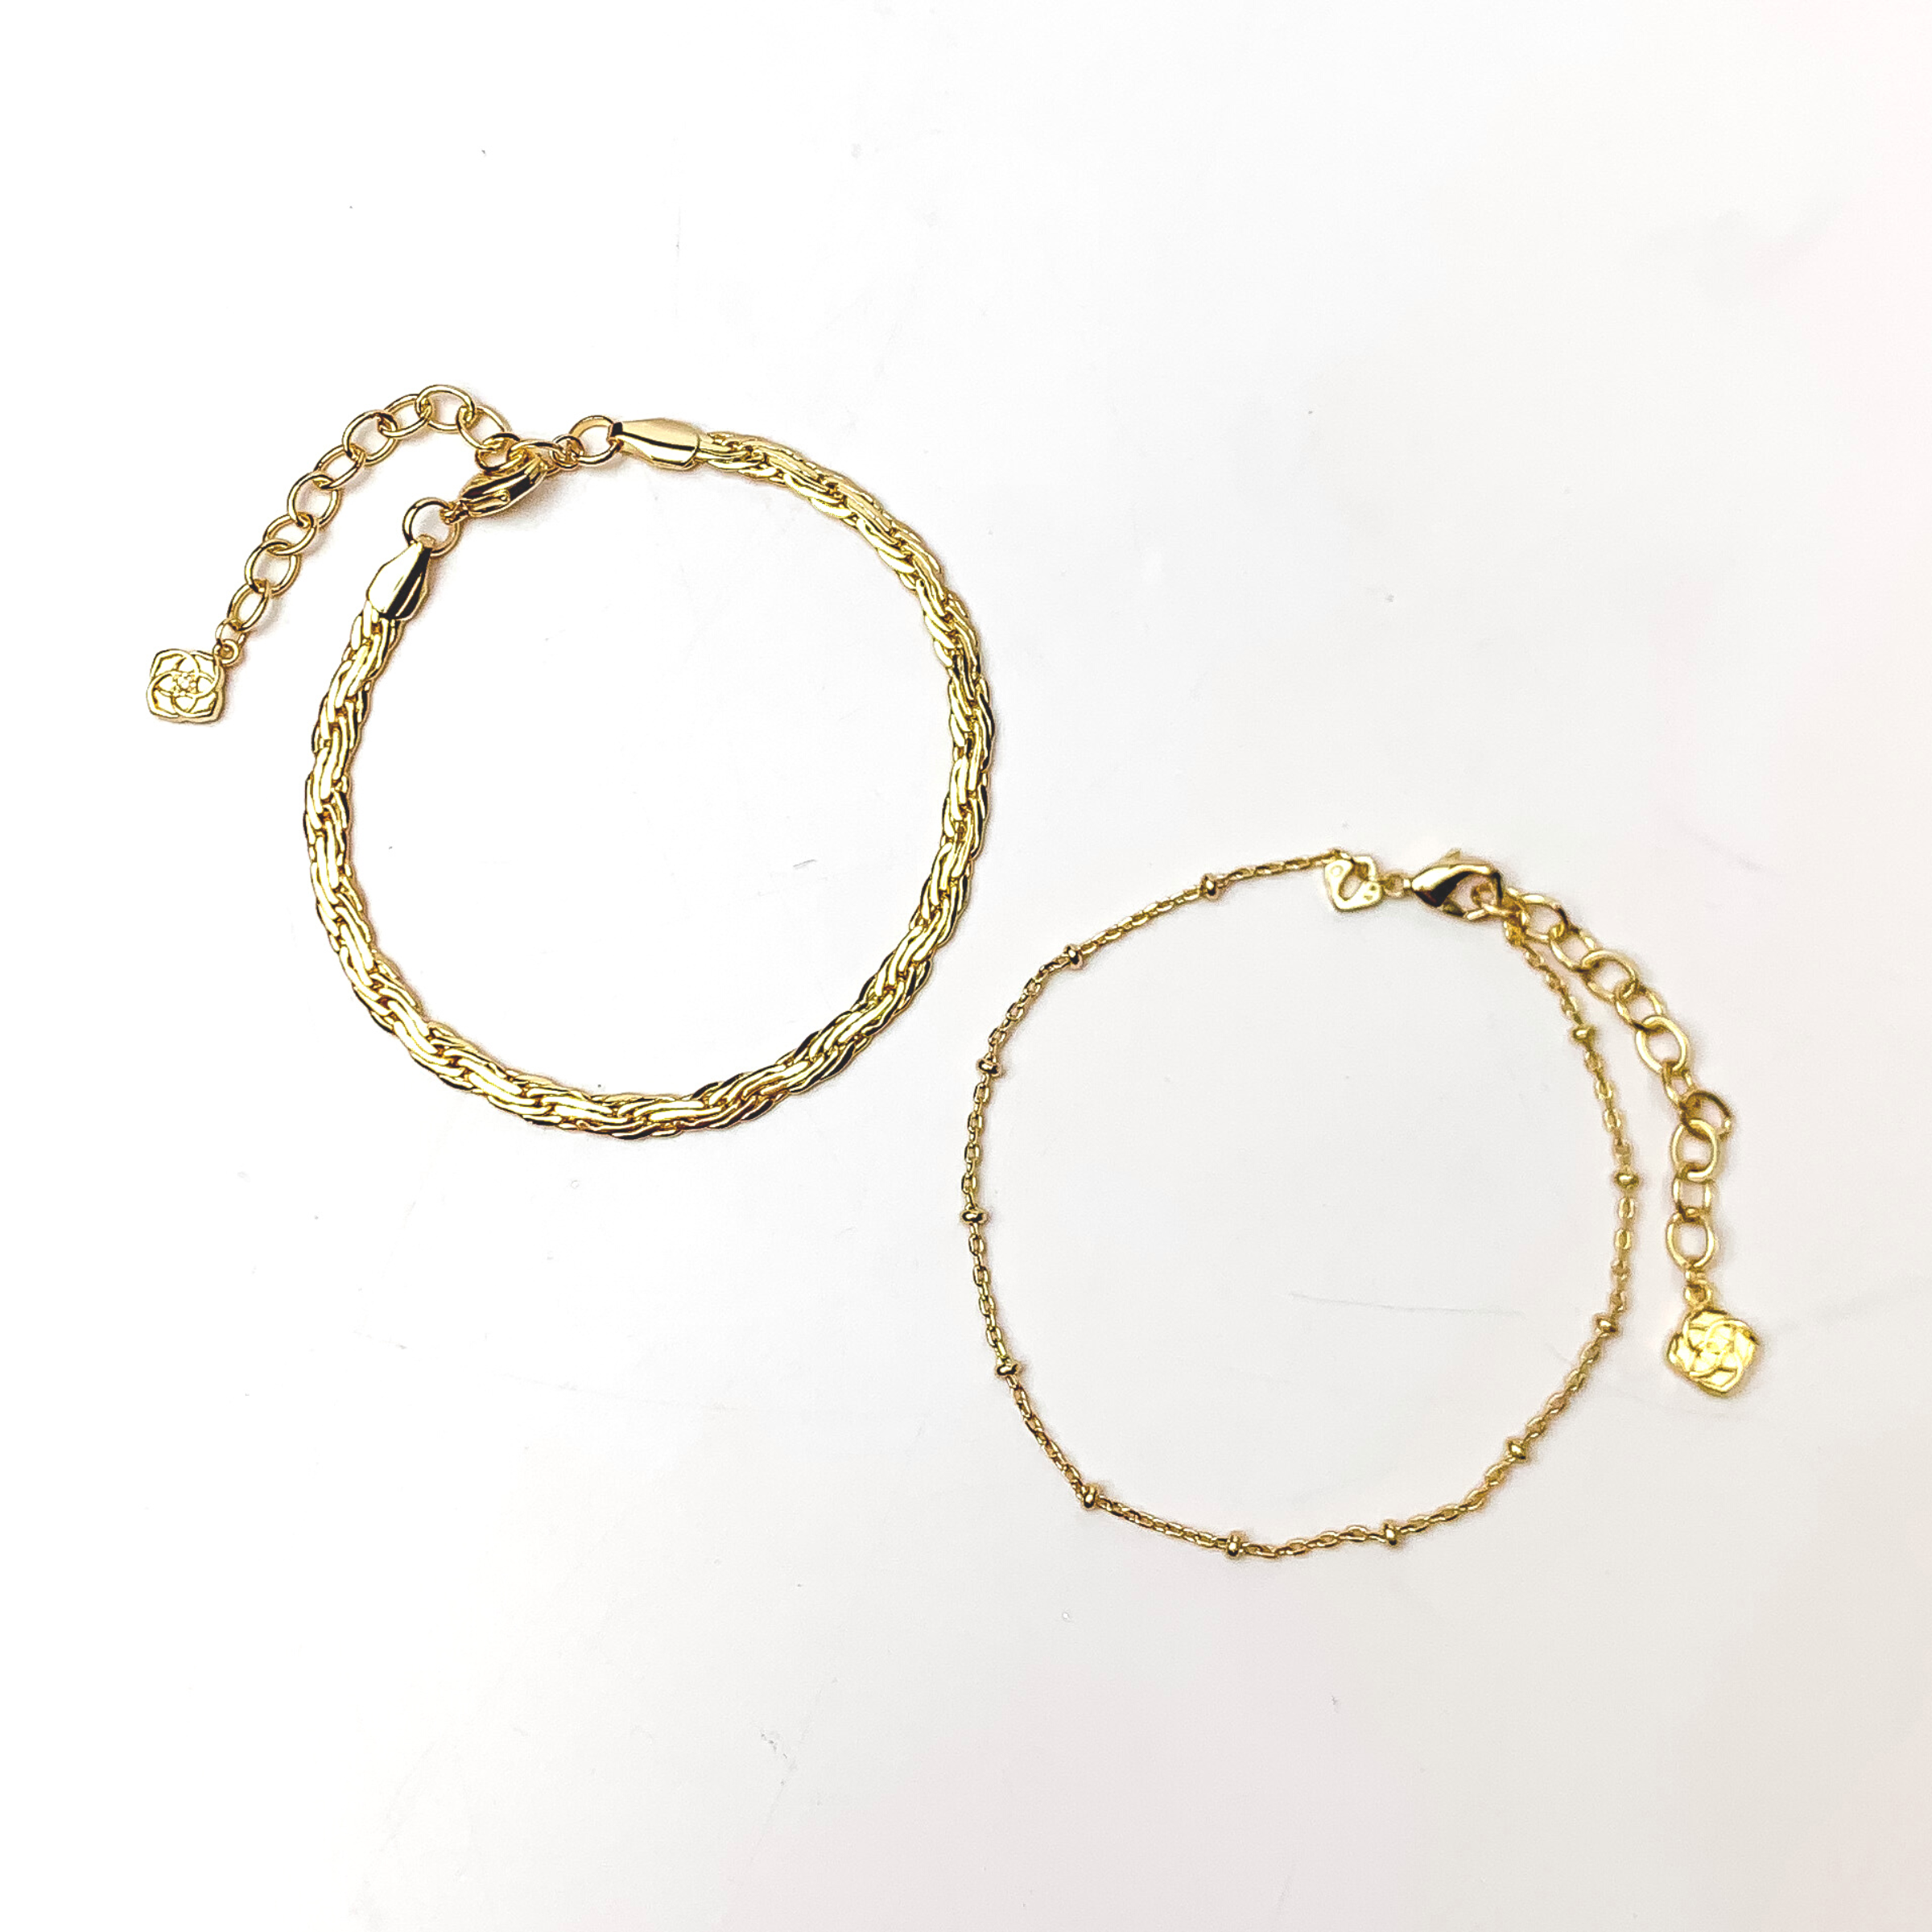 Kendra Scott | Carson Set of Two Chain Bracelet in Gold - Giddy Up Glamour Boutique